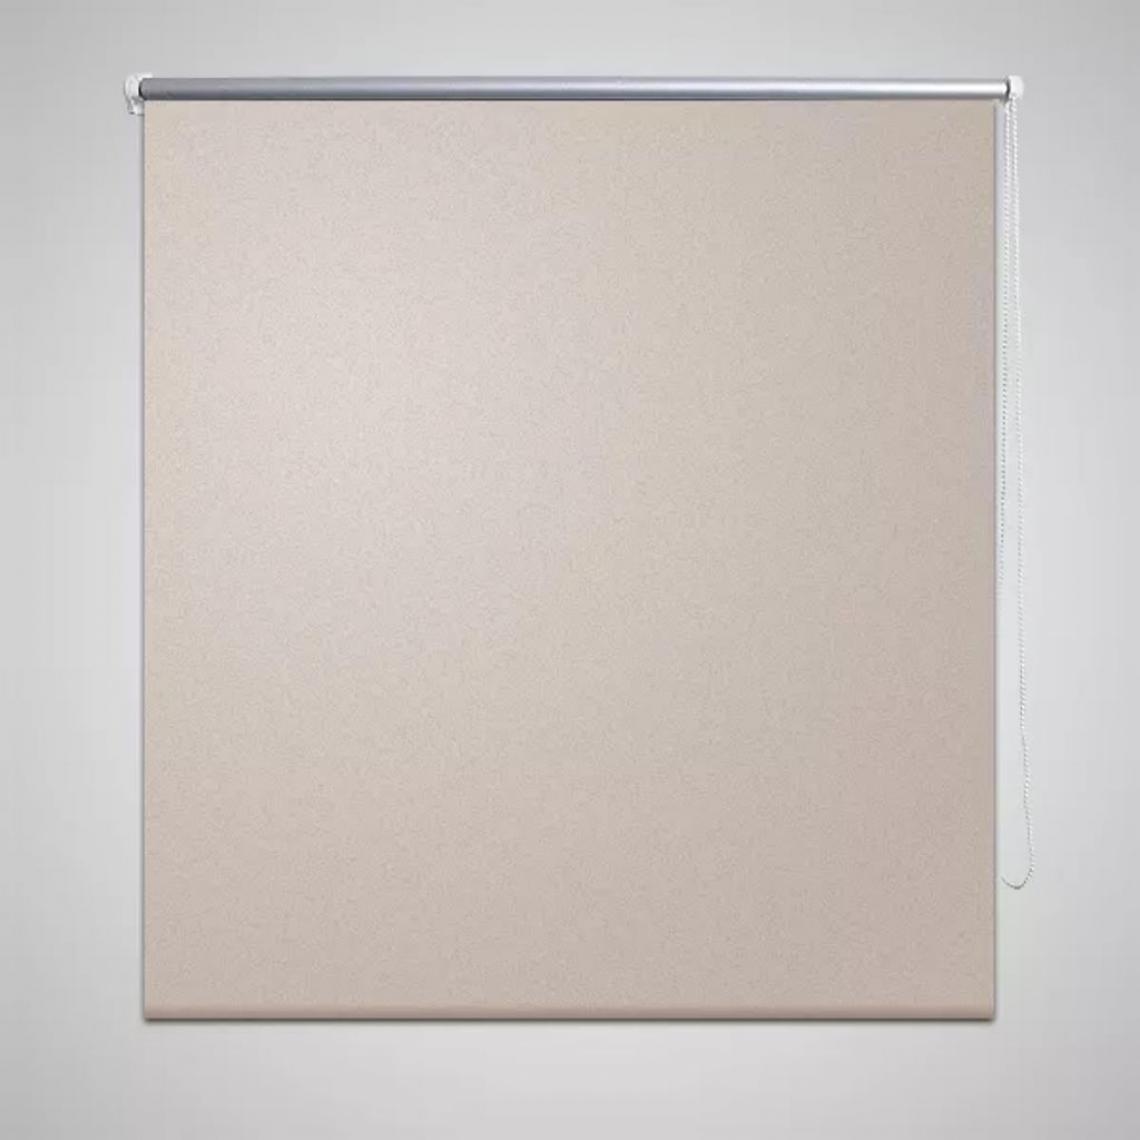 Chunhelife - Store enrouleur occultant 80 x 230 cm beige - Store banne